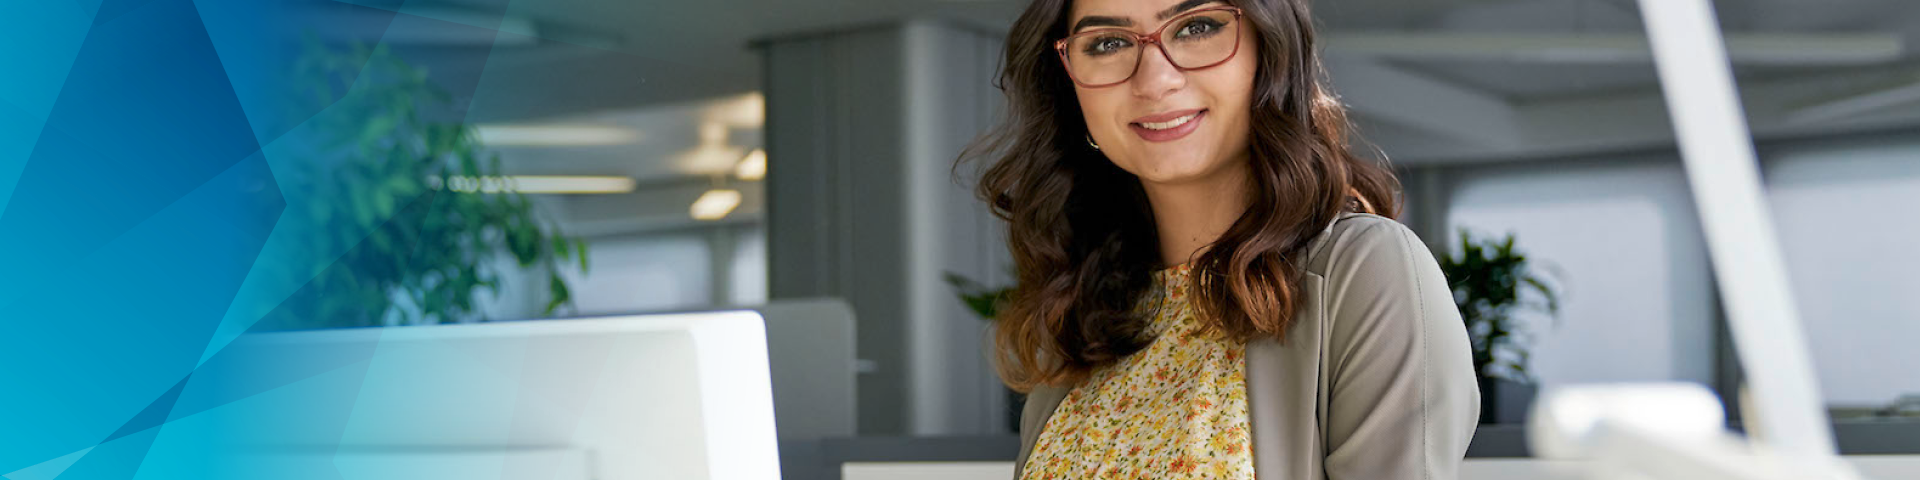 Young woman with glasses and yellow shirt in an office